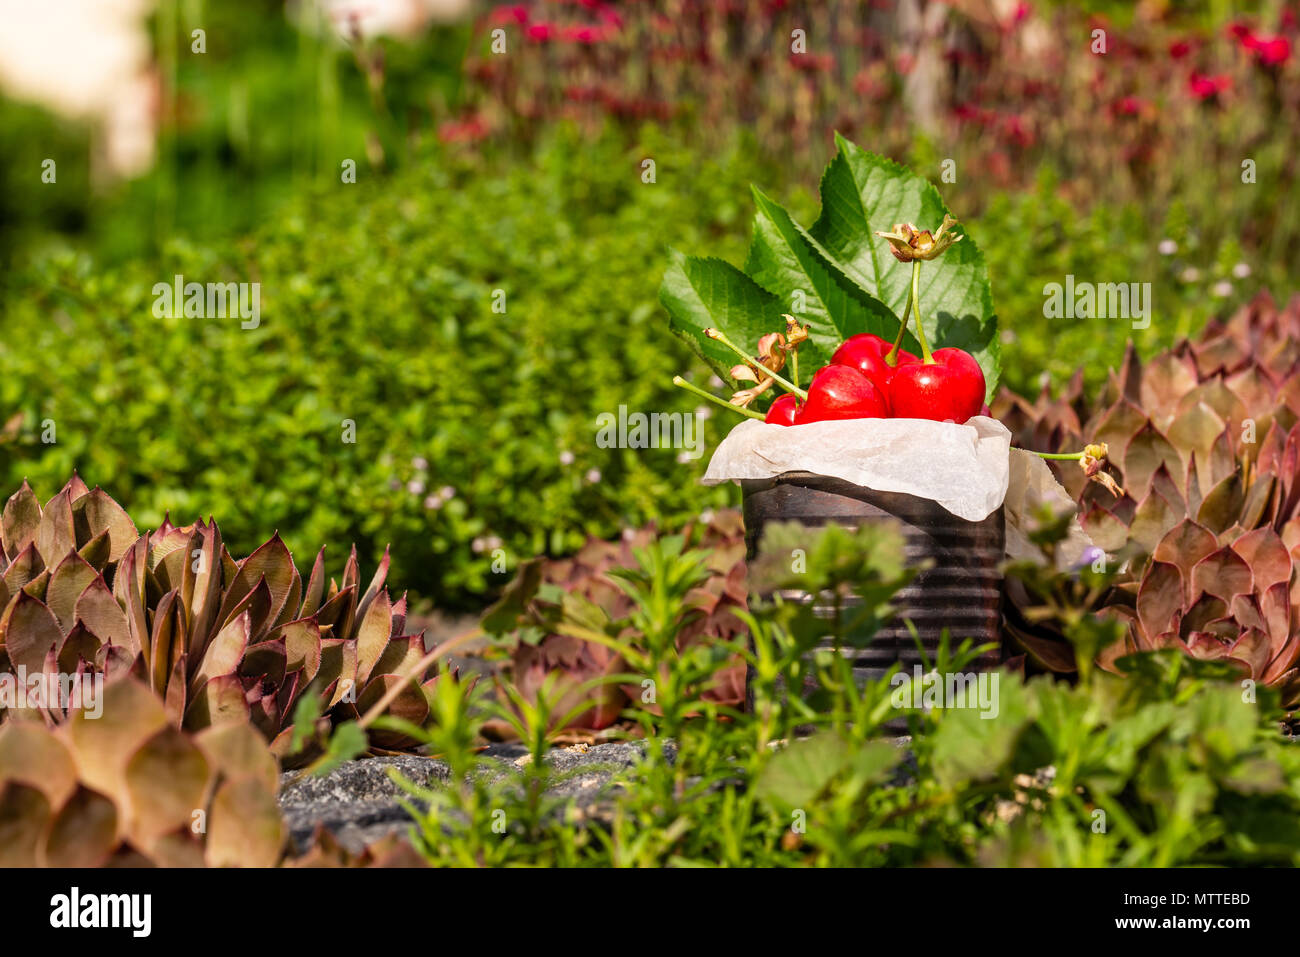 Horizontal photo with old vintage tin full of red fresh cherries. The can is placed on stone with several plants and flowers around. Fruit is in tin w Stock Photo